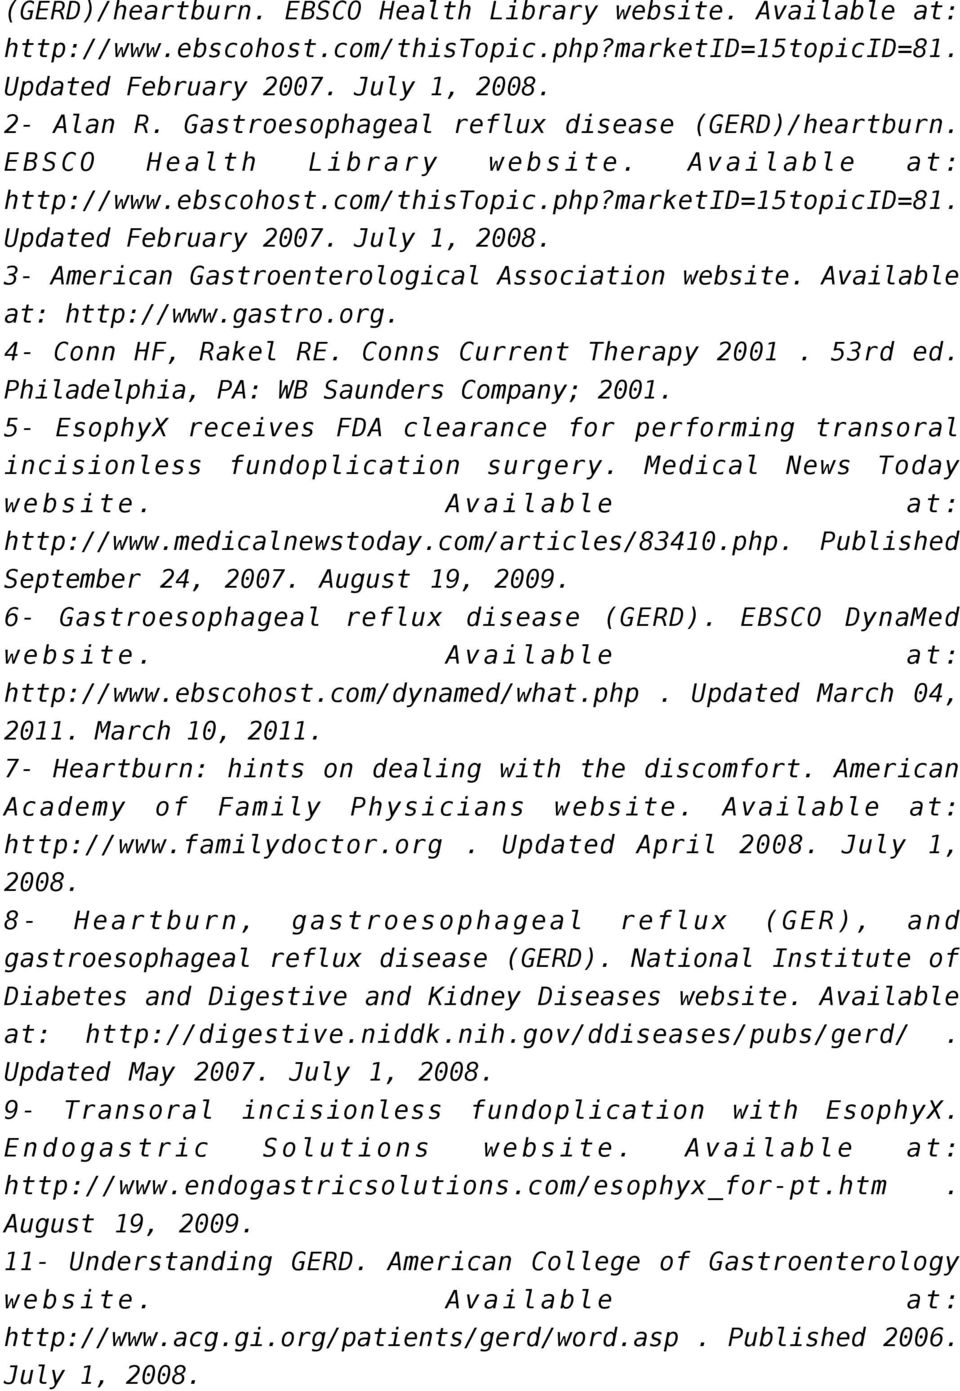 3- American Gastroenterological Association website. Available at: http://www.gastro.org. 4- Conn HF, Rakel RE. Conns Current Therapy 2001. 53rd ed. Philadelphia, PA: WB Saunders Company; 2001.